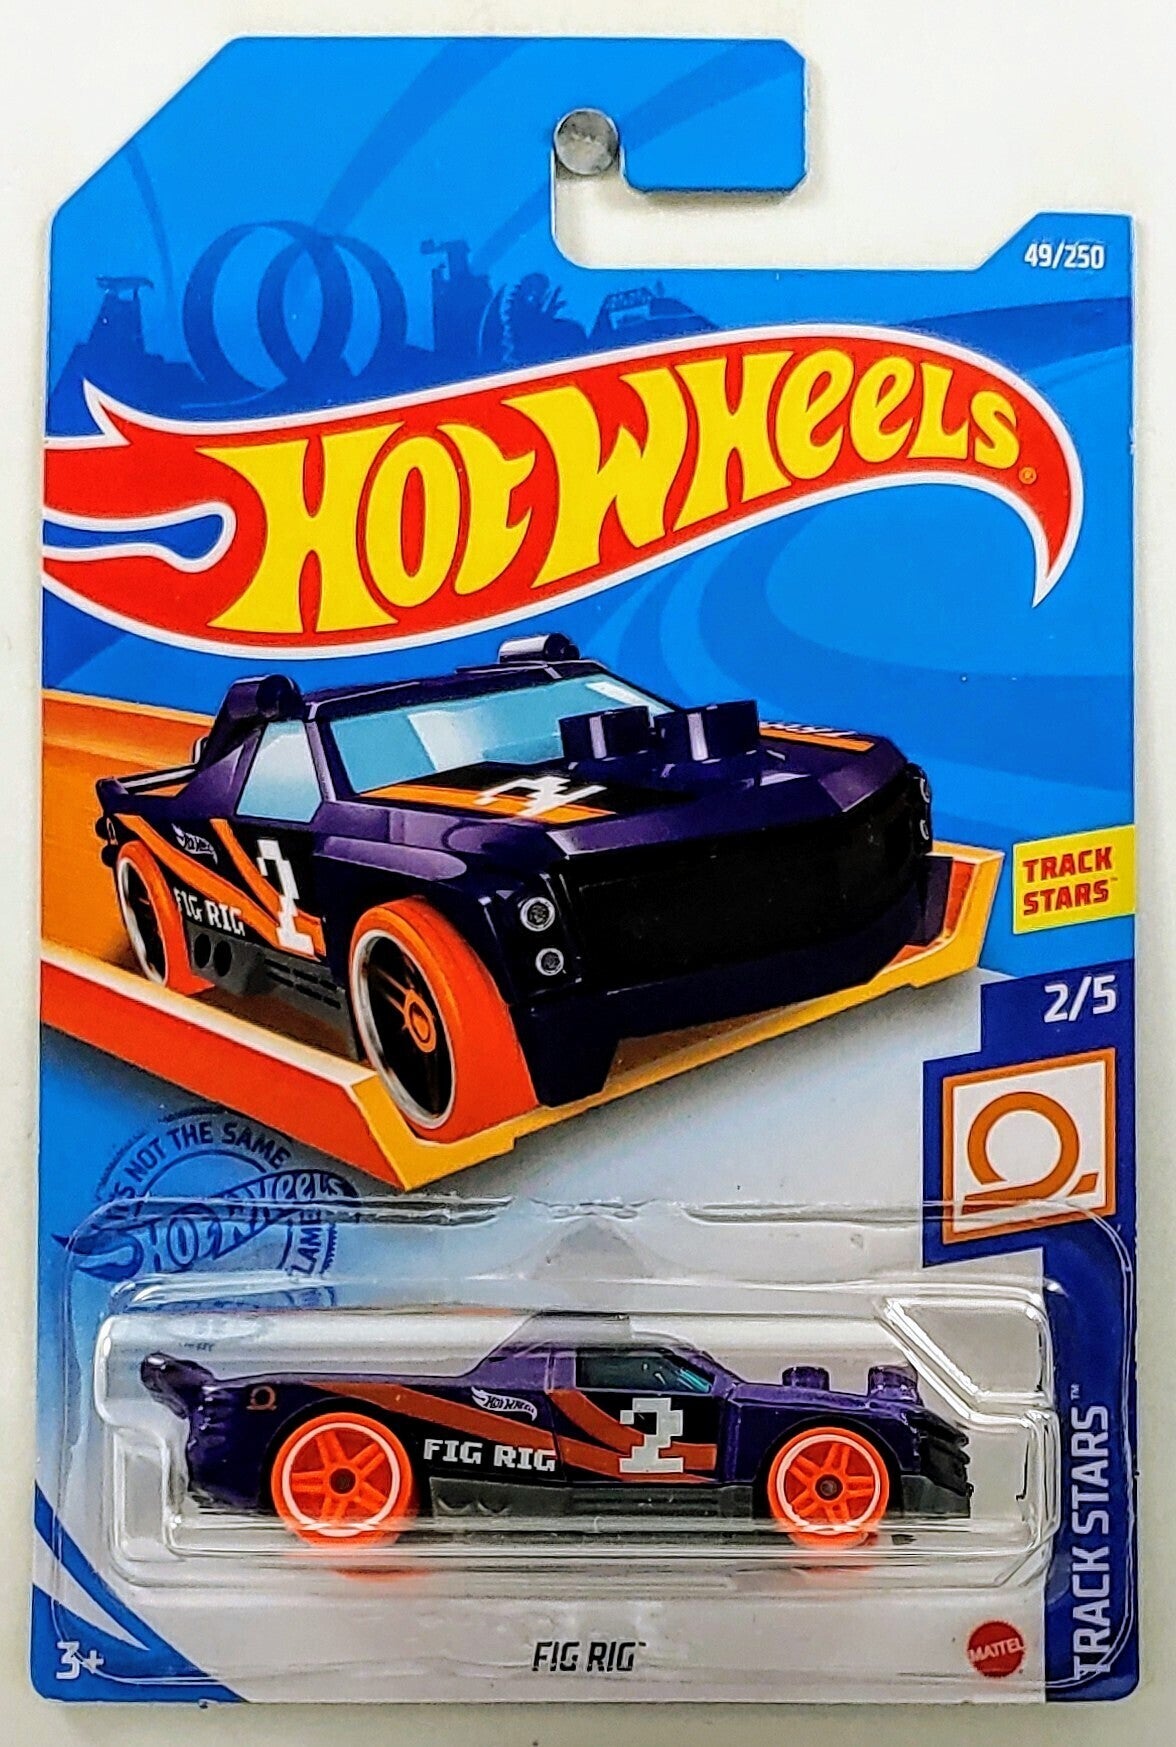 Hot Wheels 2021 - Collector # 049/250 - Track Stars 2/5 - Fig Rig - Purple - IC